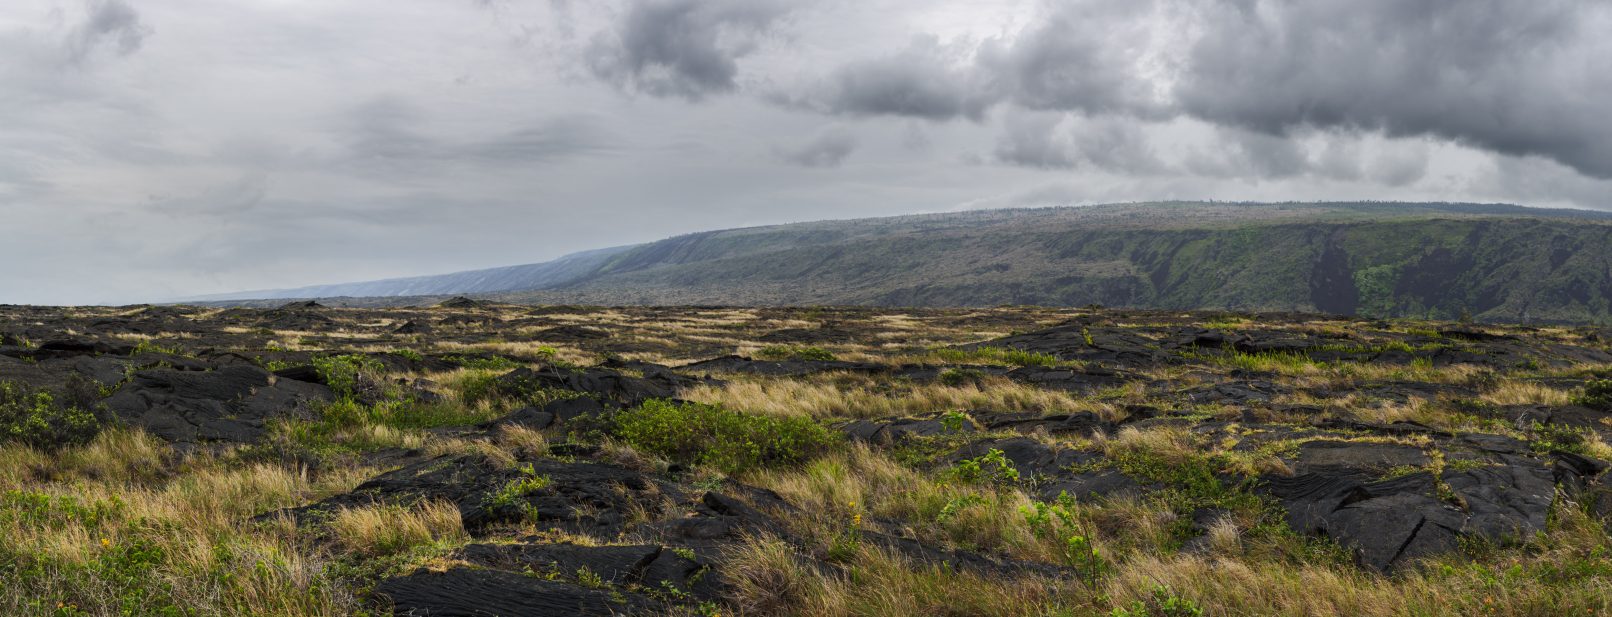 Hawaii, open field view from Chain of Craters Road